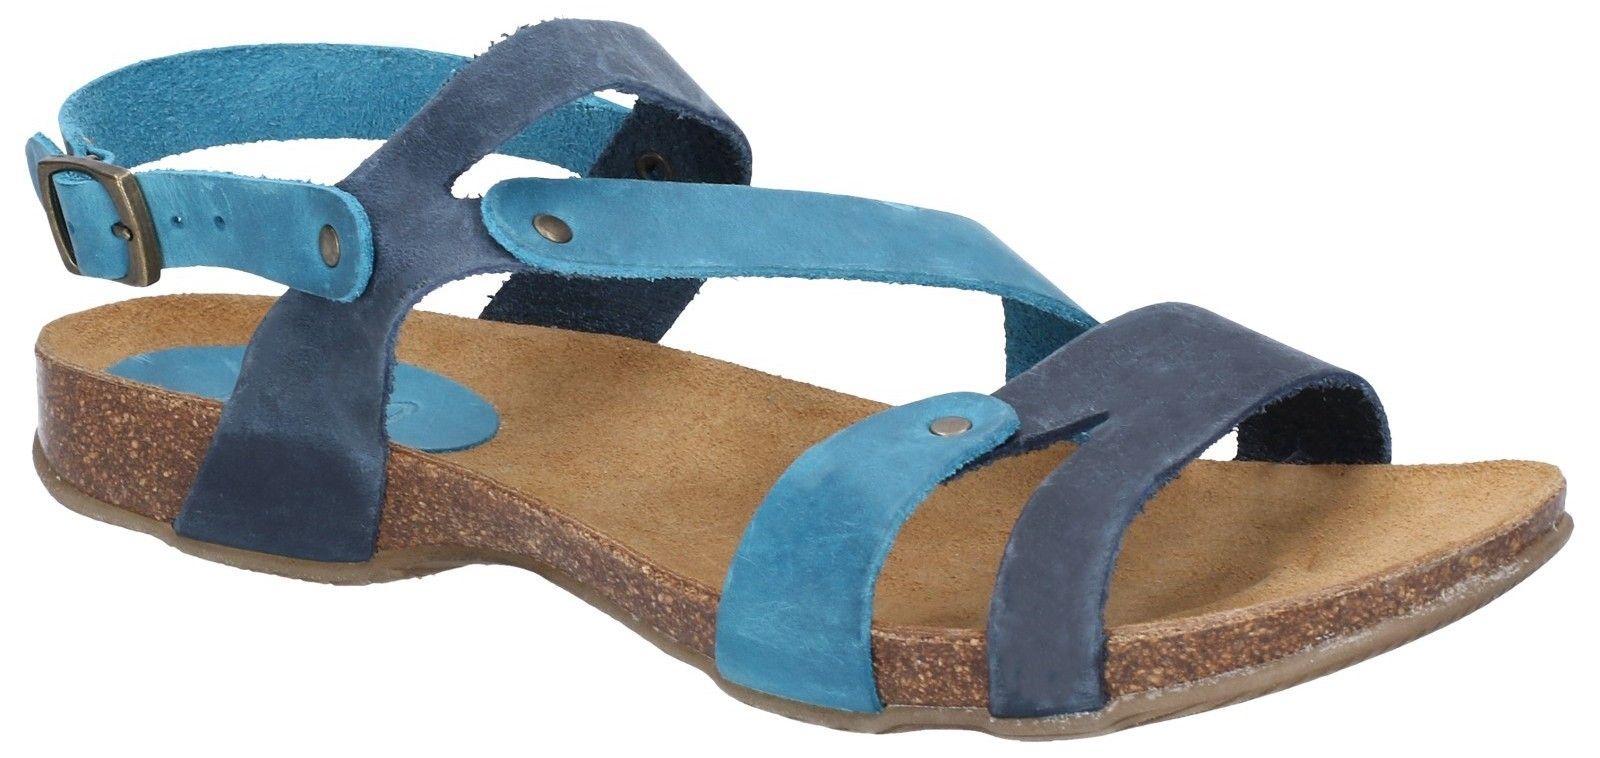 Women's comfort beach sandal with supple multi-coloured leather uppers and stud decorations.Women's fun beach sandal with brightly coloured straps. 
Supple leather uppers with stylish stud features. 
Open toe design with mid Z-strap. 
Adjustable ankle strap with buckle closure. 
Ergonomically designed footbed with comfort toe bridge.